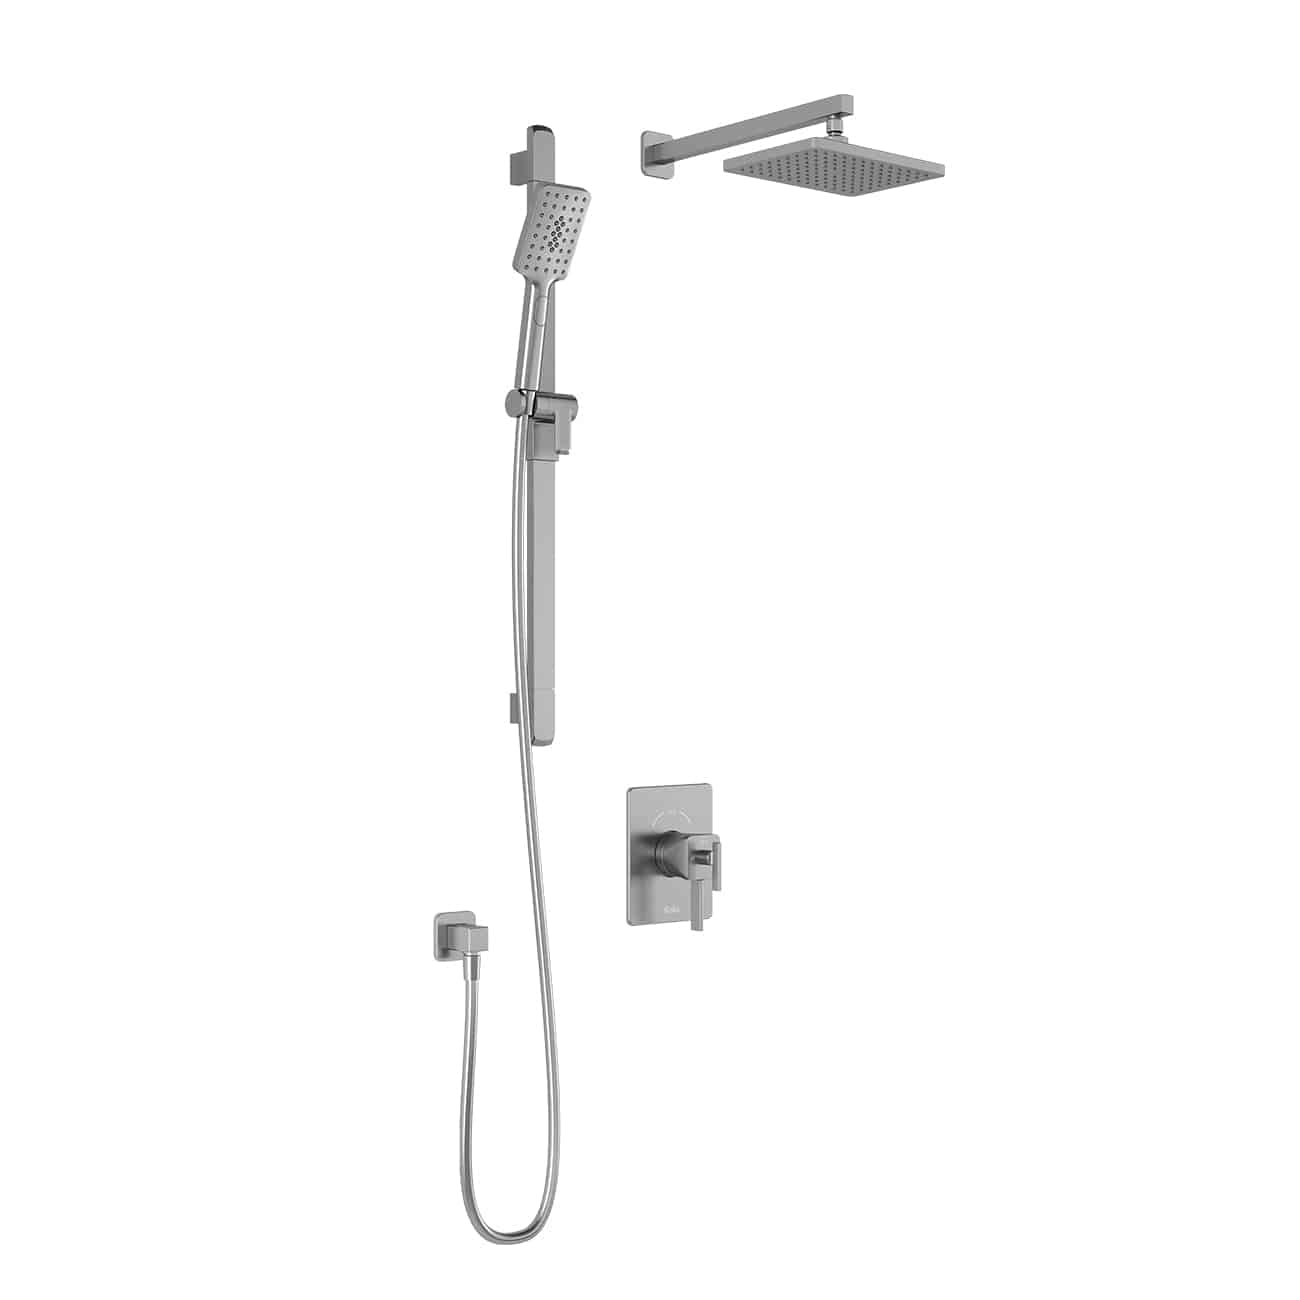 Kalia SquareOne TCD1 (Valve Not Included) AQUATONIK T/P Coaxial Shower System with 10-1/4" Shower Head and Wall Arm- Chrome